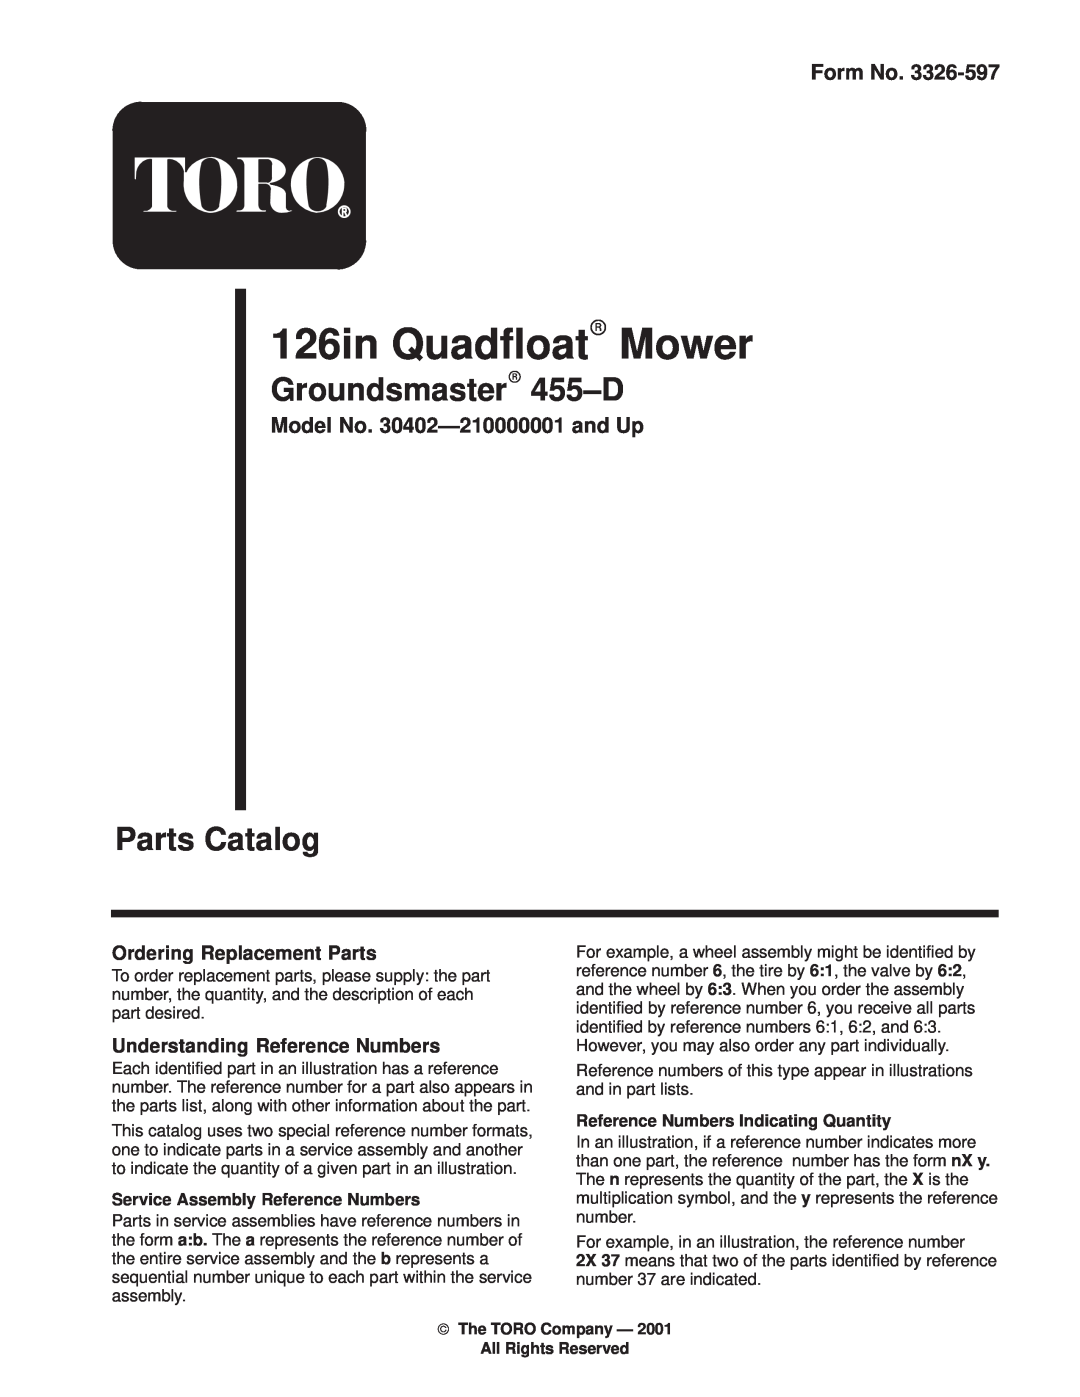 Toro 30402210000001 and Up manual Groundsmaster 455±D, Parts Catalog, Service Assembly Reference Numbers, Form No 